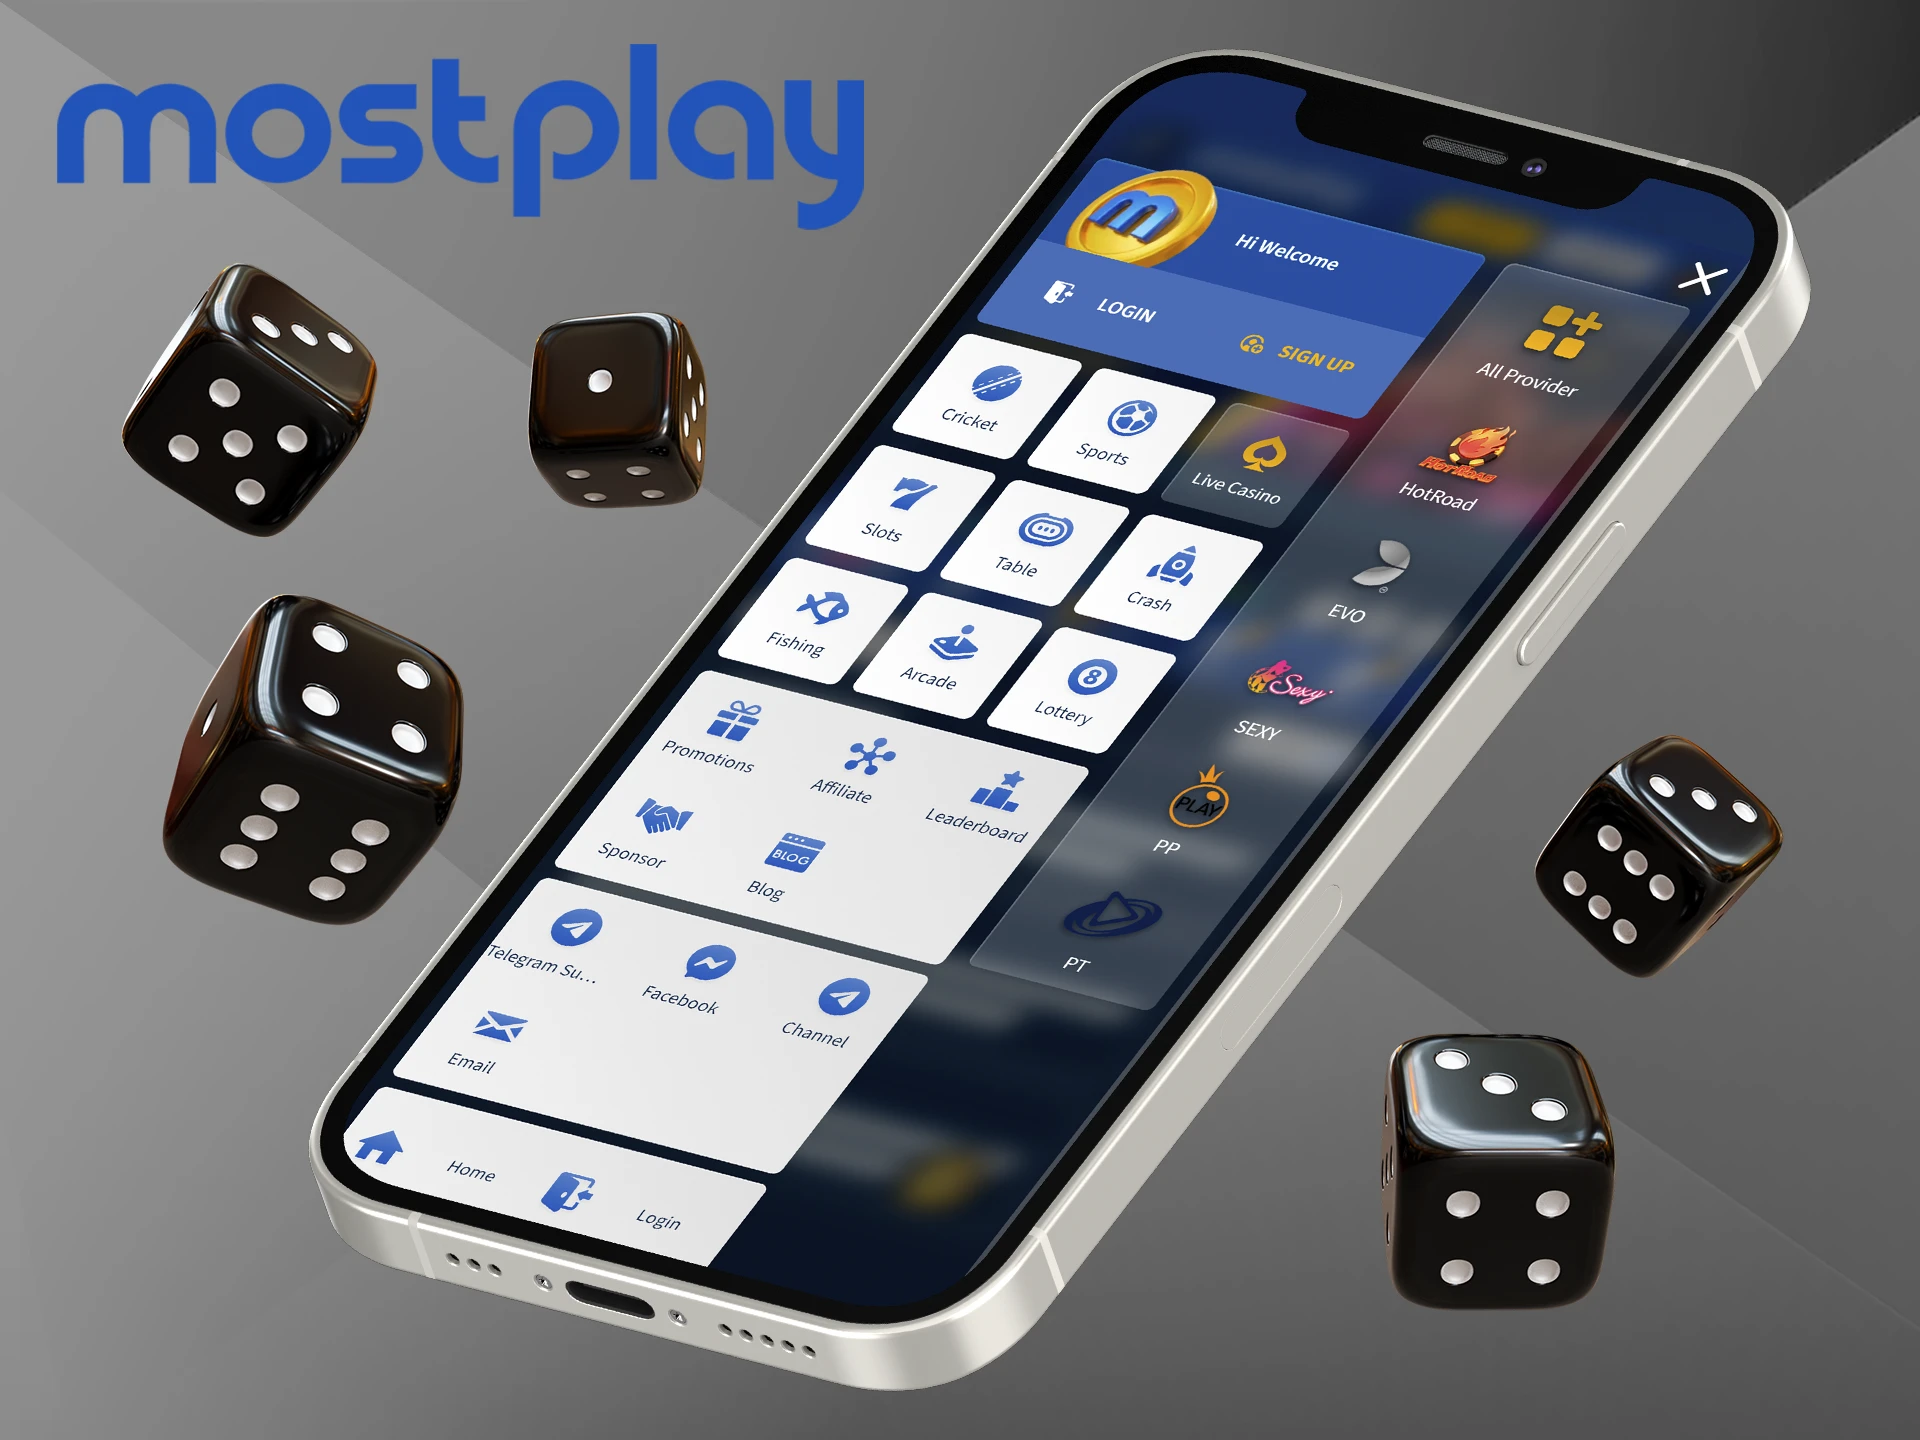 Check out the list of providers that are available at Mostplay.